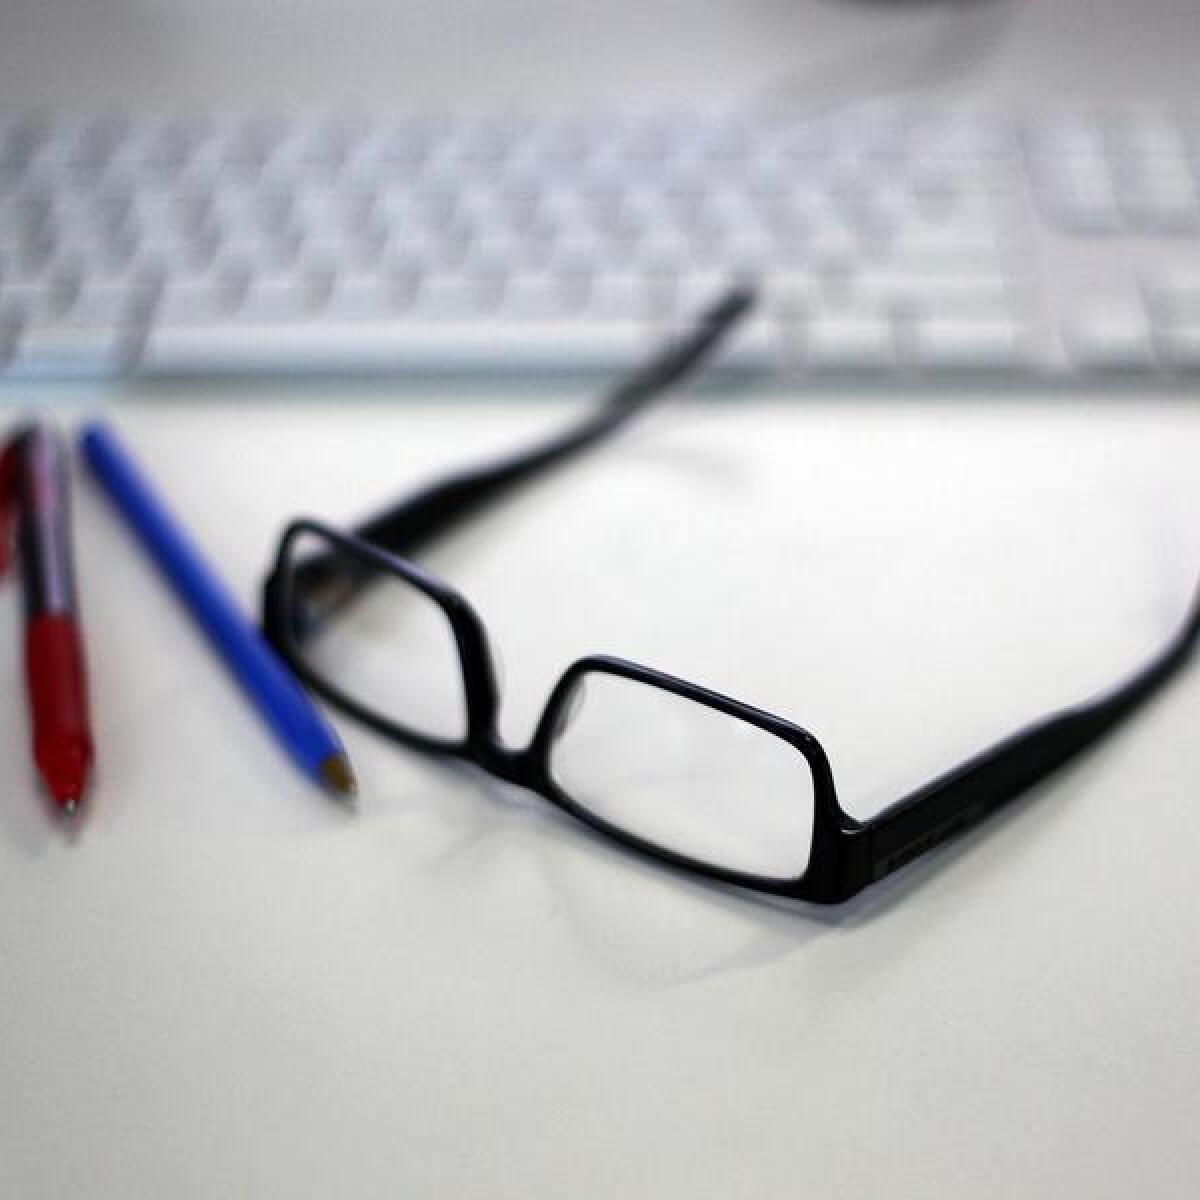 Reading glasses, pens and a keyboard